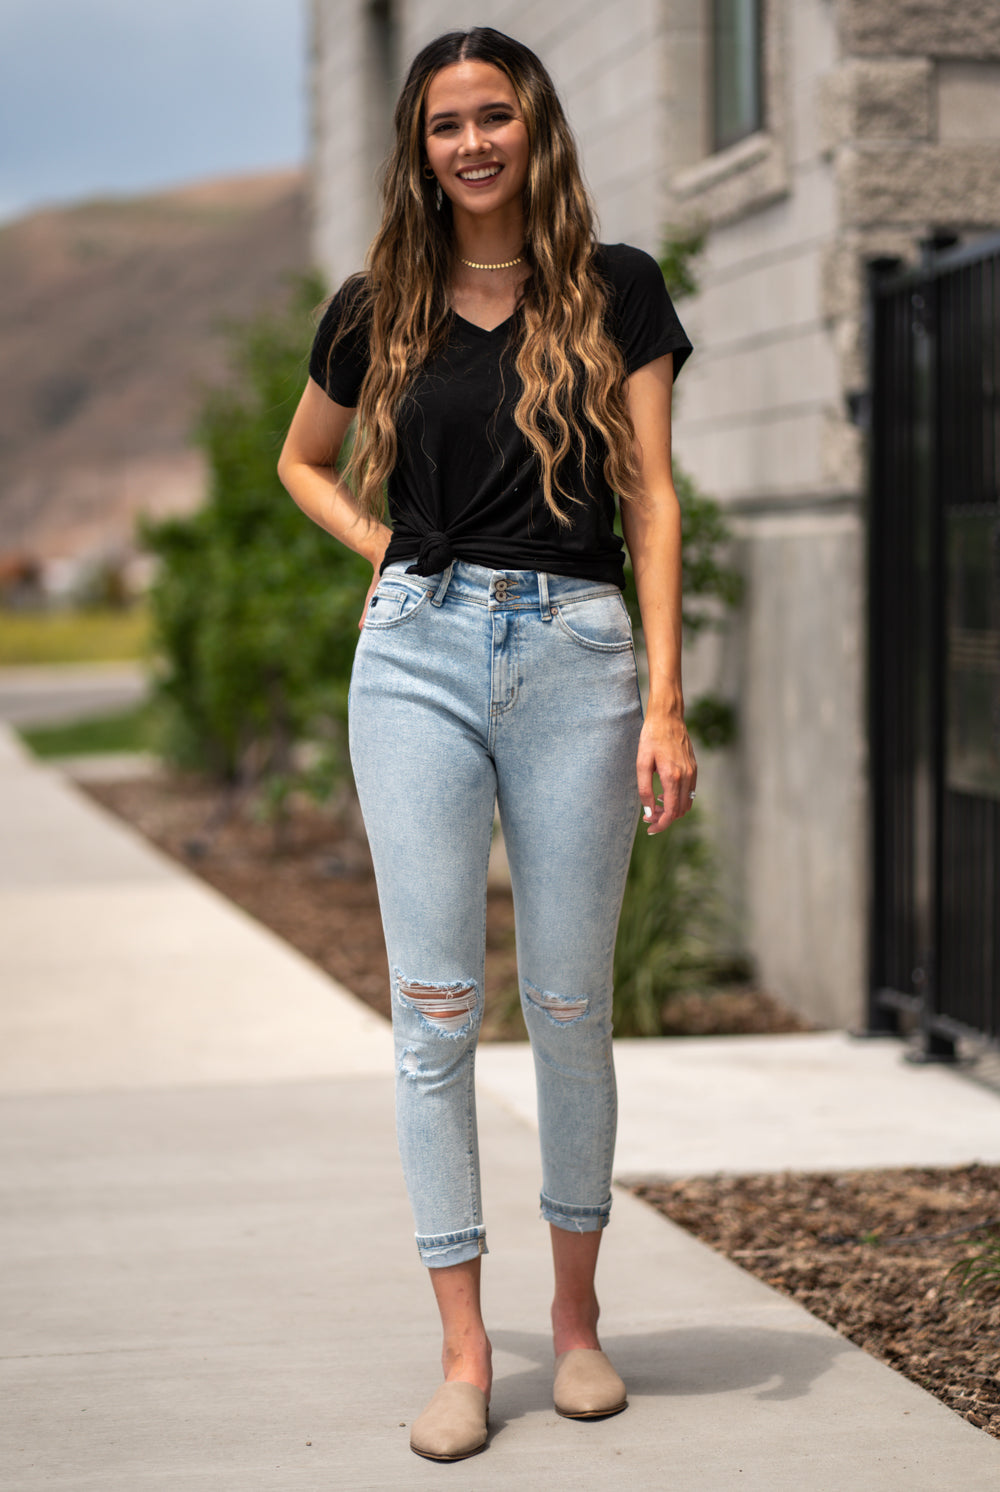 Kan Can Jeans  Collection: Summer 2020 Color: Acid Wash Cut: Ankle Skinny, 26" Inseam  Rise: High Rise, 10.5" Front Rise Stitching: Classic Fly: Zipper Style #: KC8594L Contact us for any additional measurements or sizing